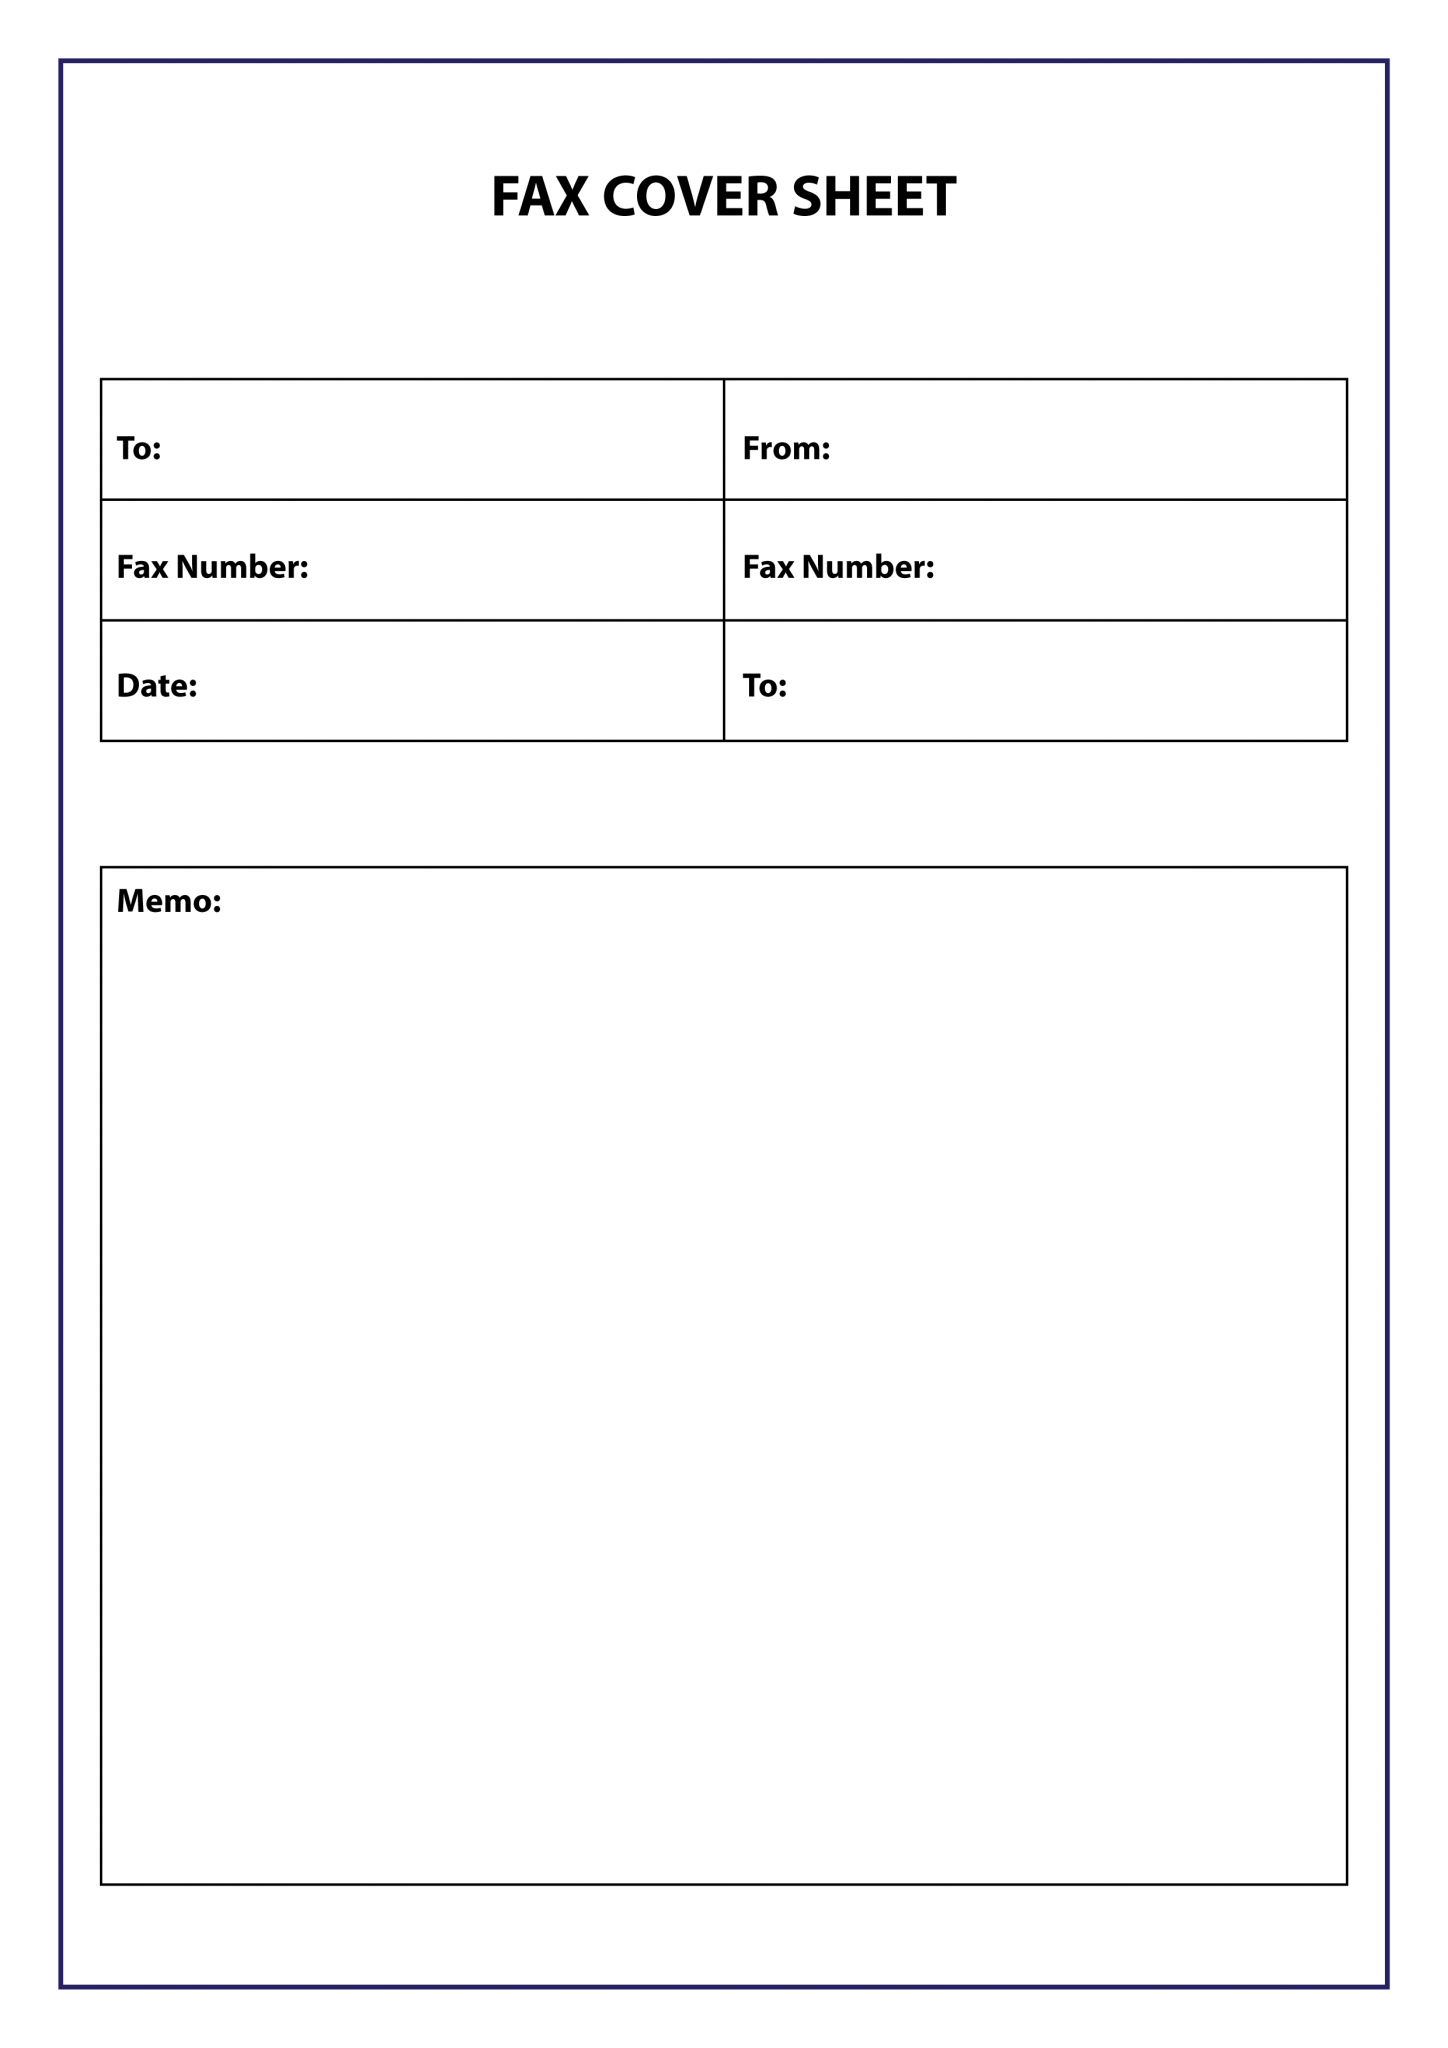 general fax cover letter template